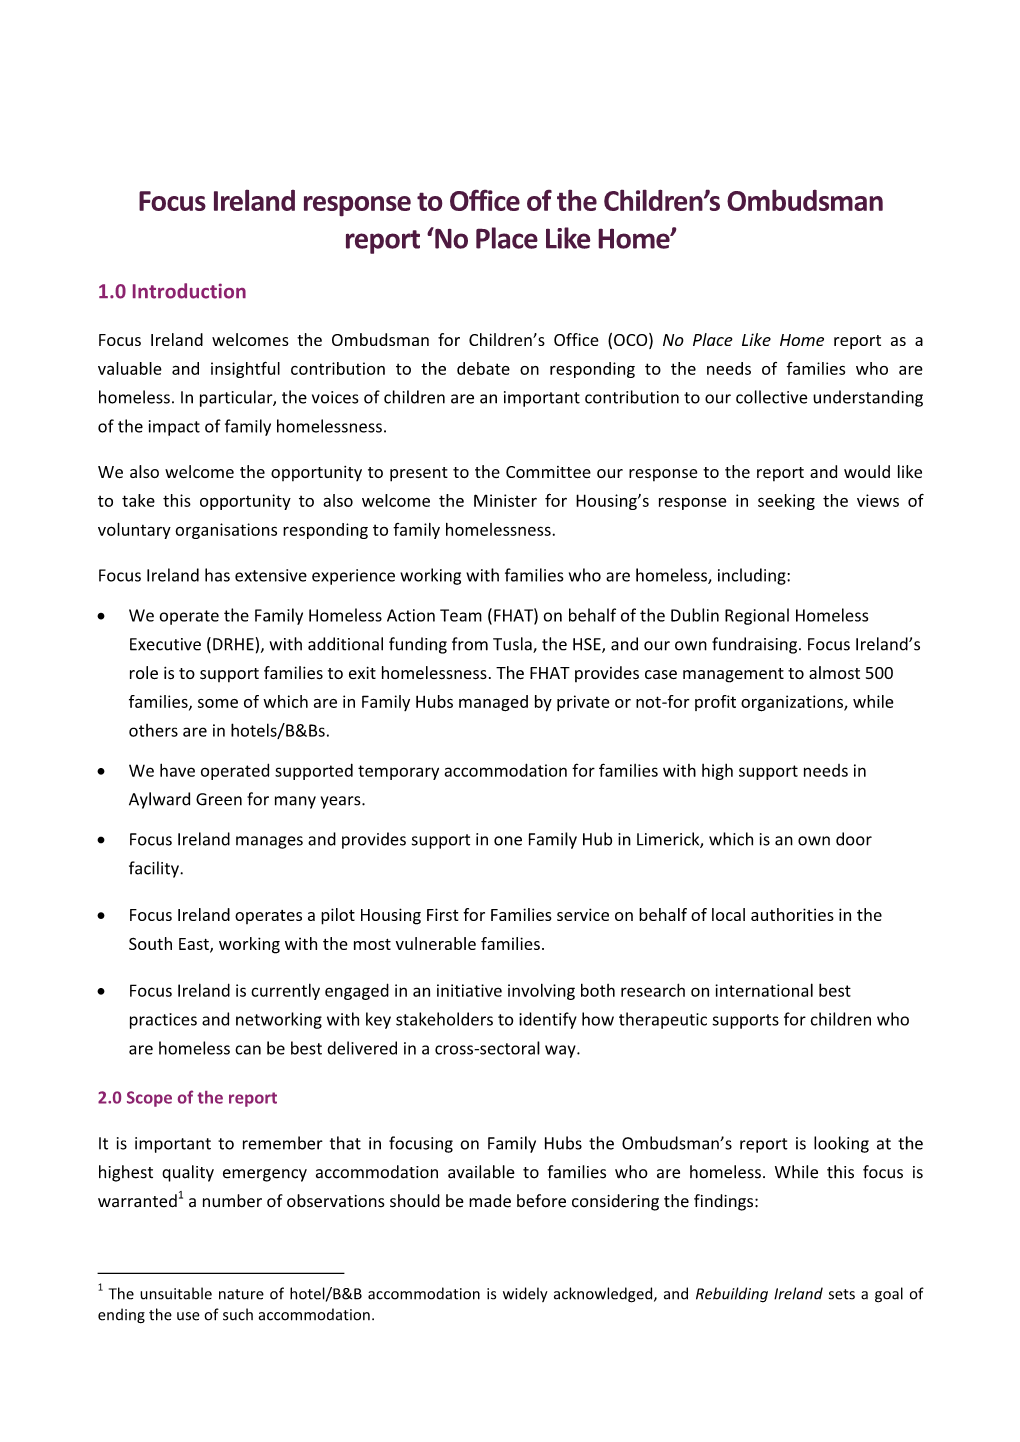 Submissions on the Impact of Homelessness on Children